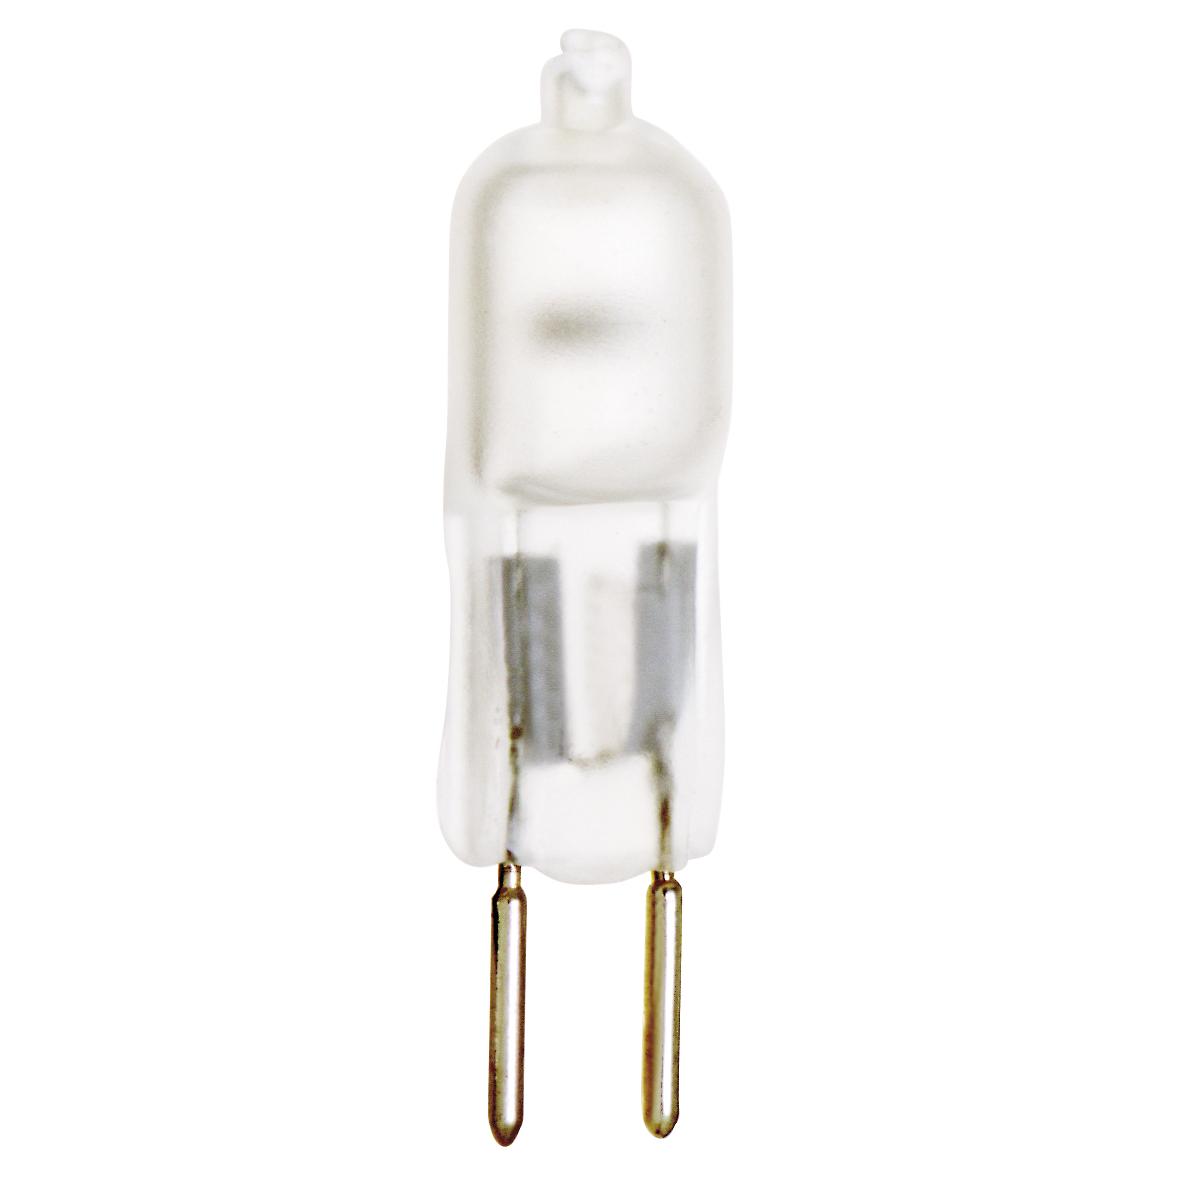 S1911 50W BI-PIN FROSTED 12V.